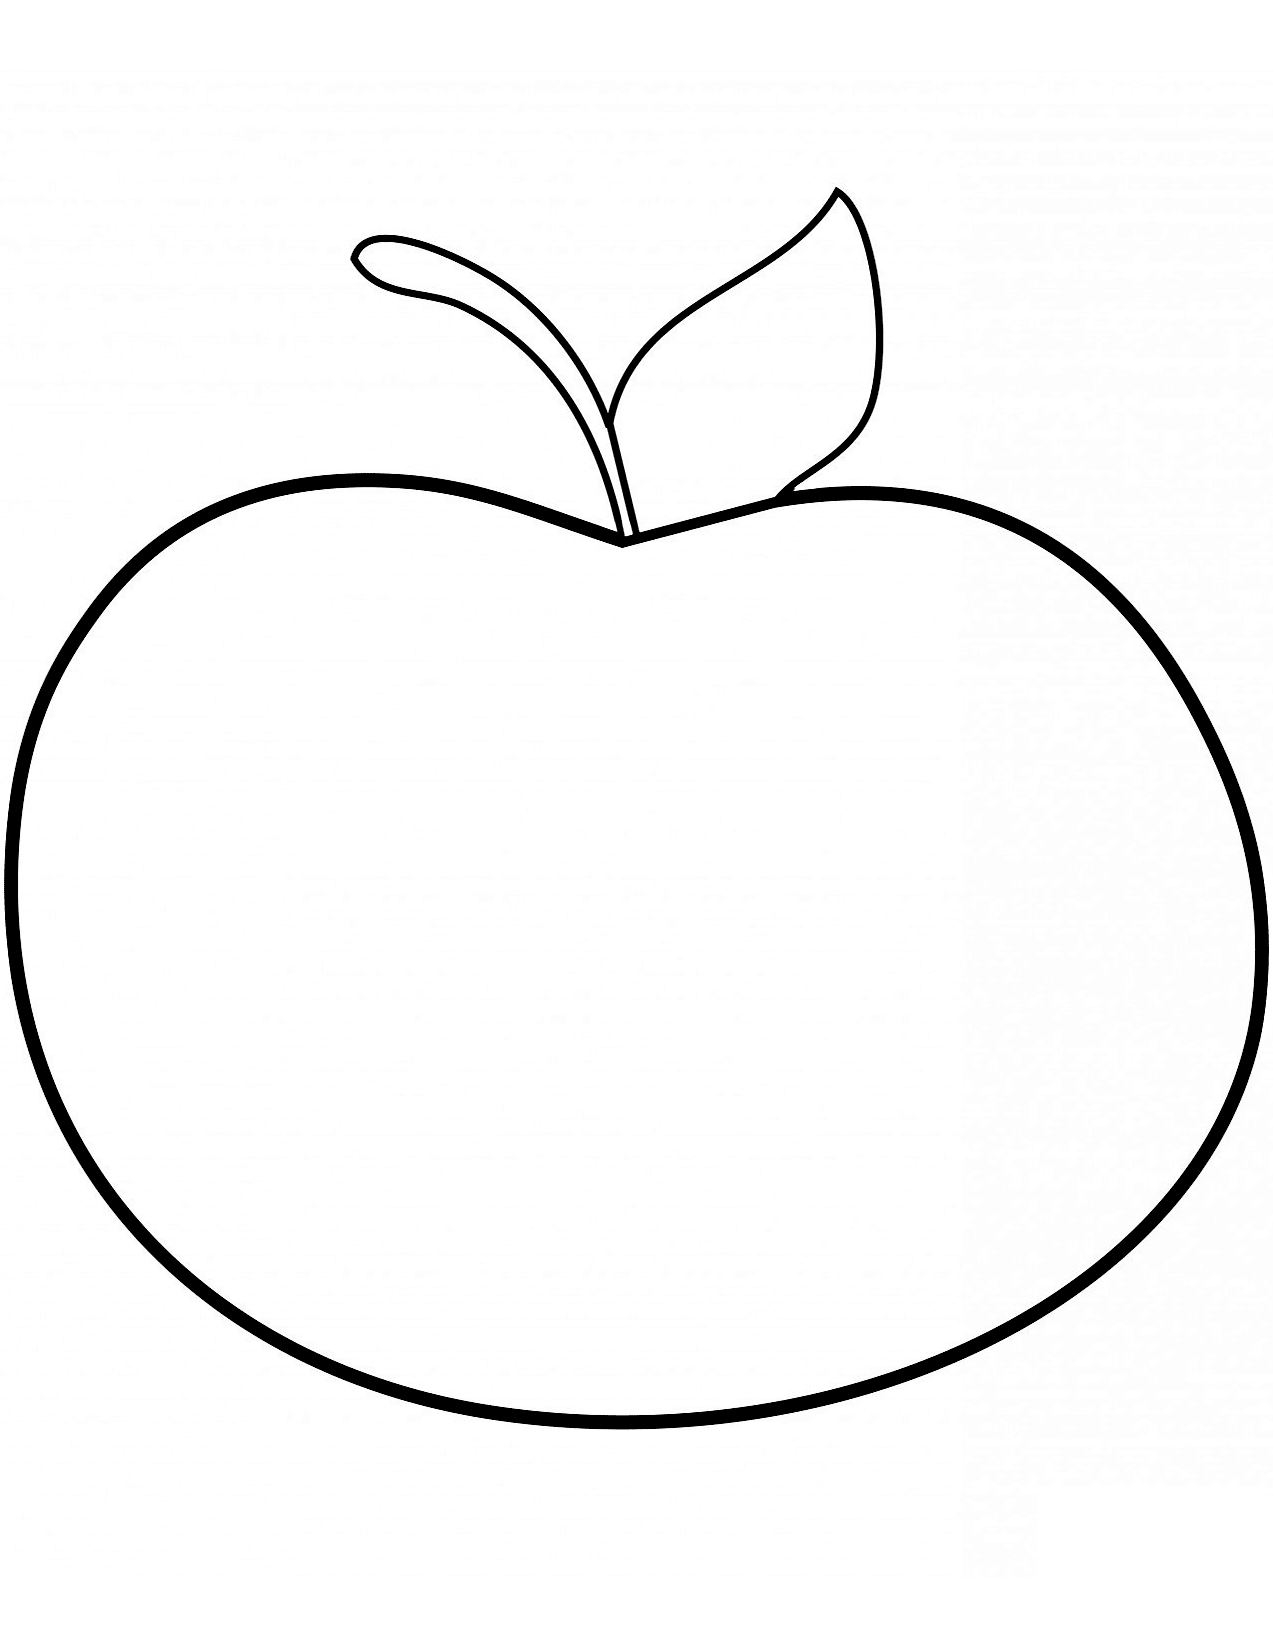 Apple 20  coloring page to print and coloring